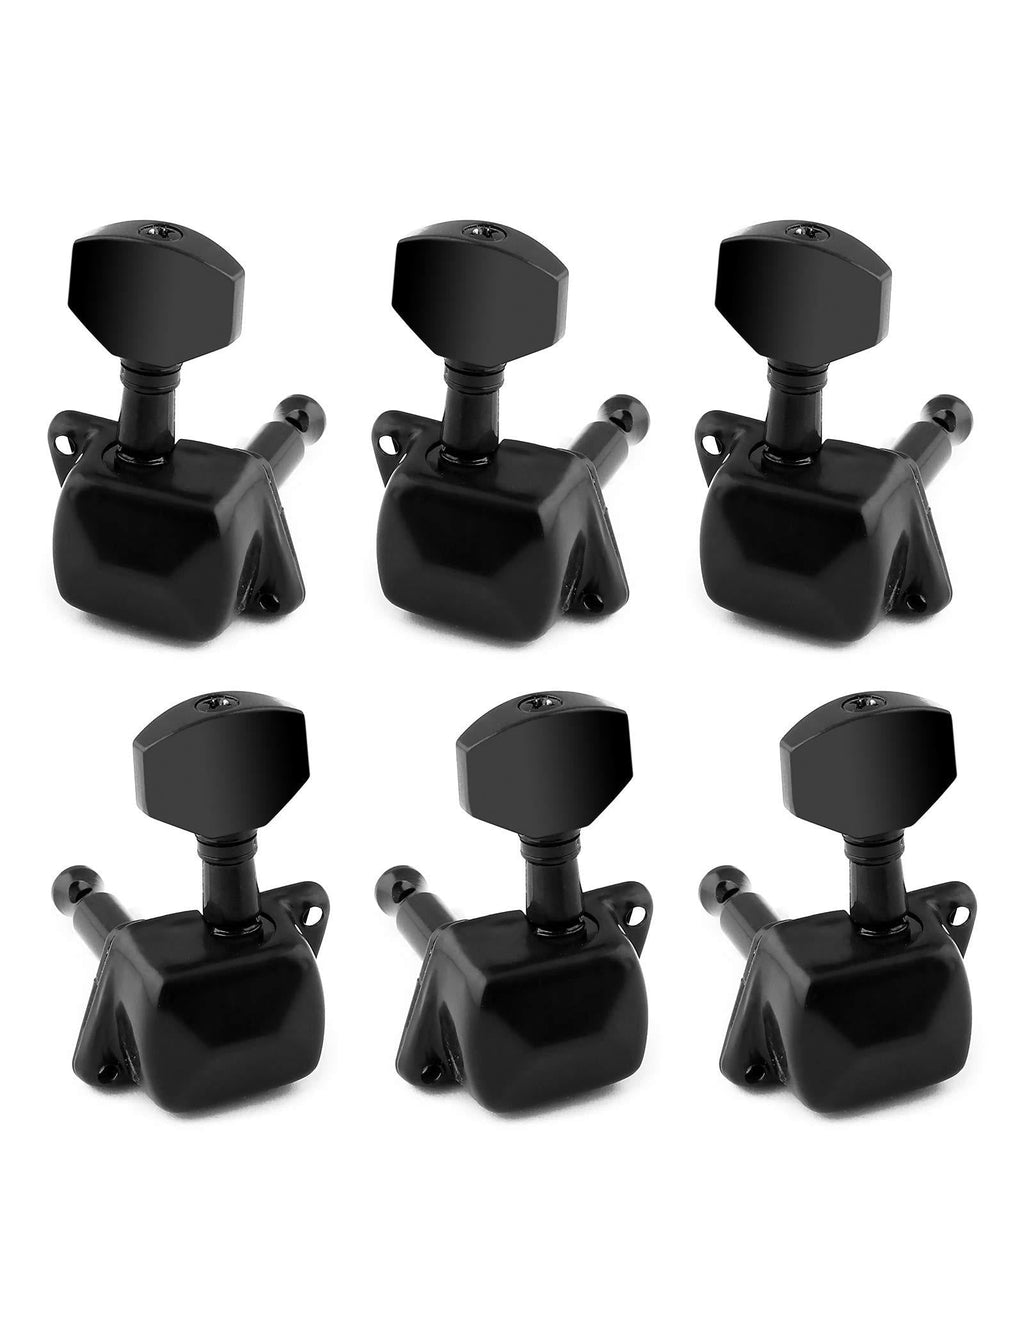 Holmer Guitar String Tuning Pegs Semiclosed Machine Heads Tuners Tuning Keys 3 Left 3 Right for Acoustic Guitar or Electric Guitar Black.